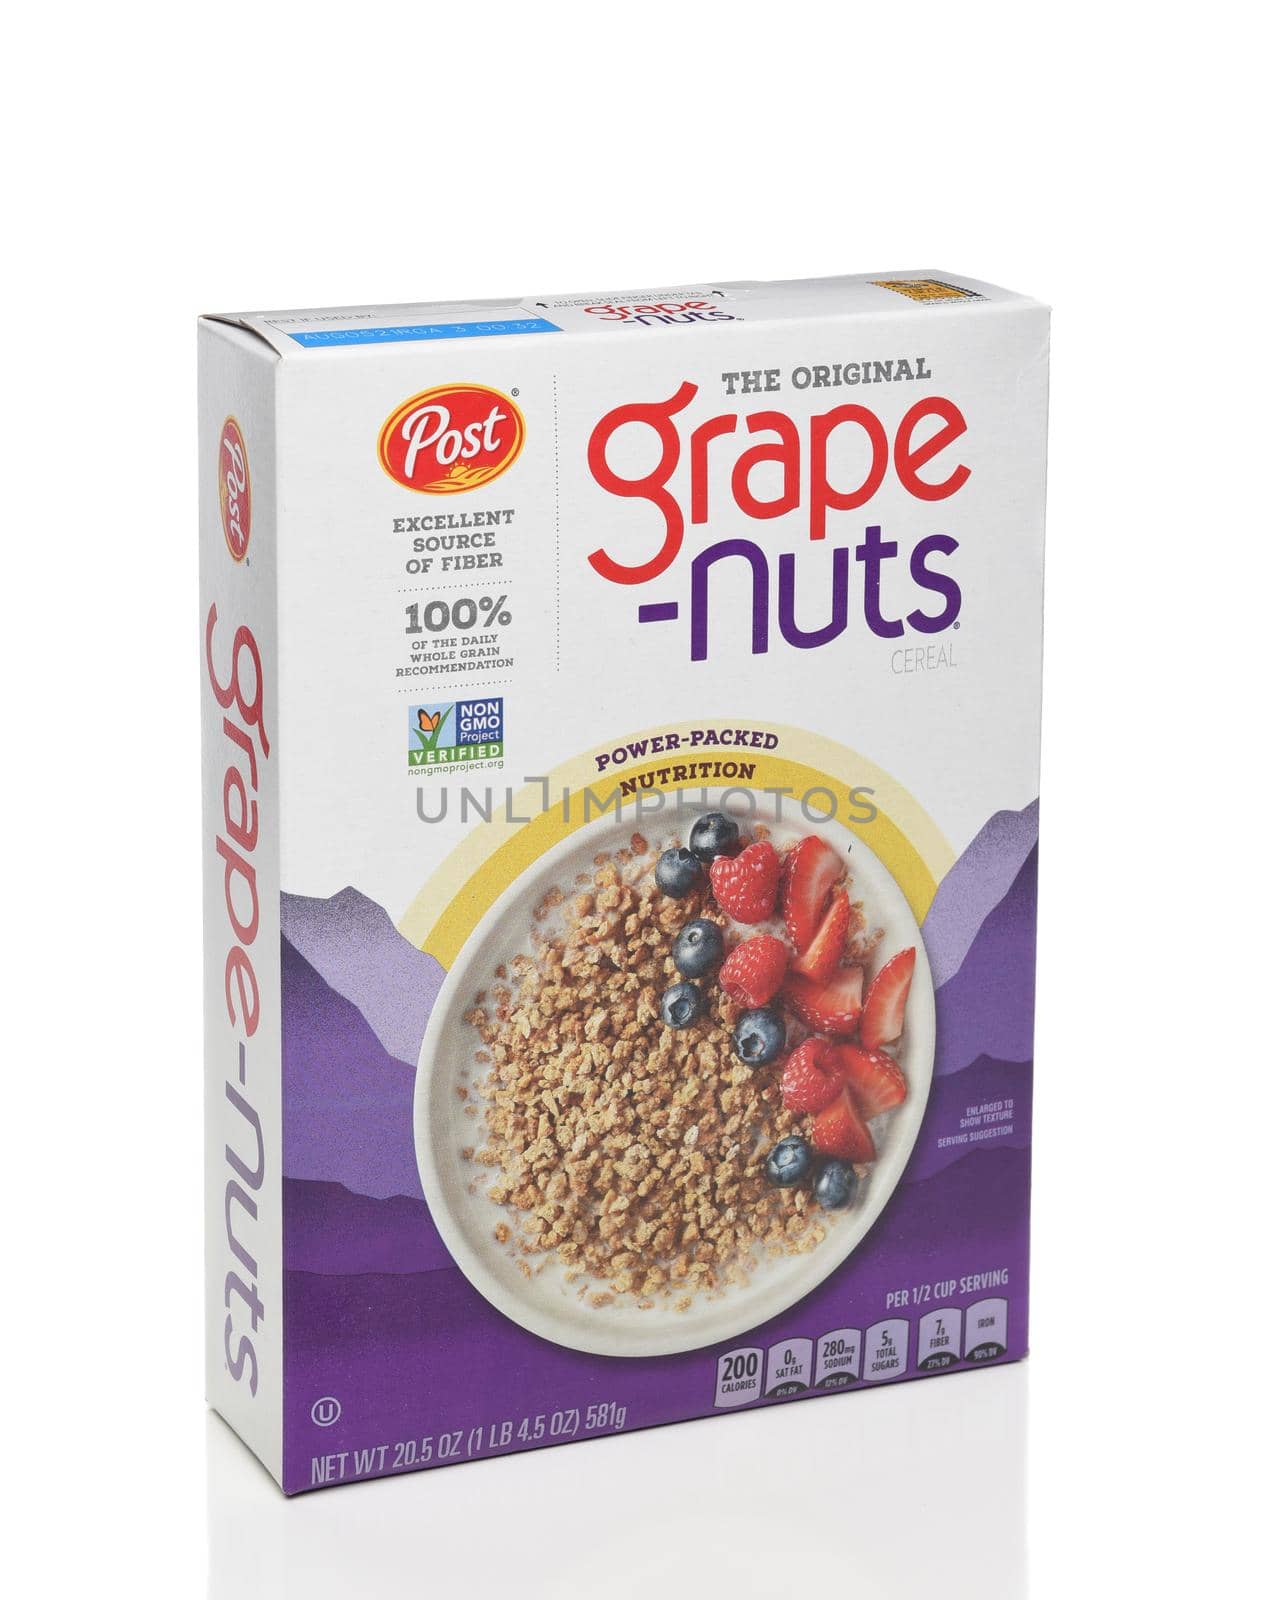 IRVINE, CALIFORNIA - 6 OCT 2020: A box of Post Grape-Nuts Cereal. by sCukrov